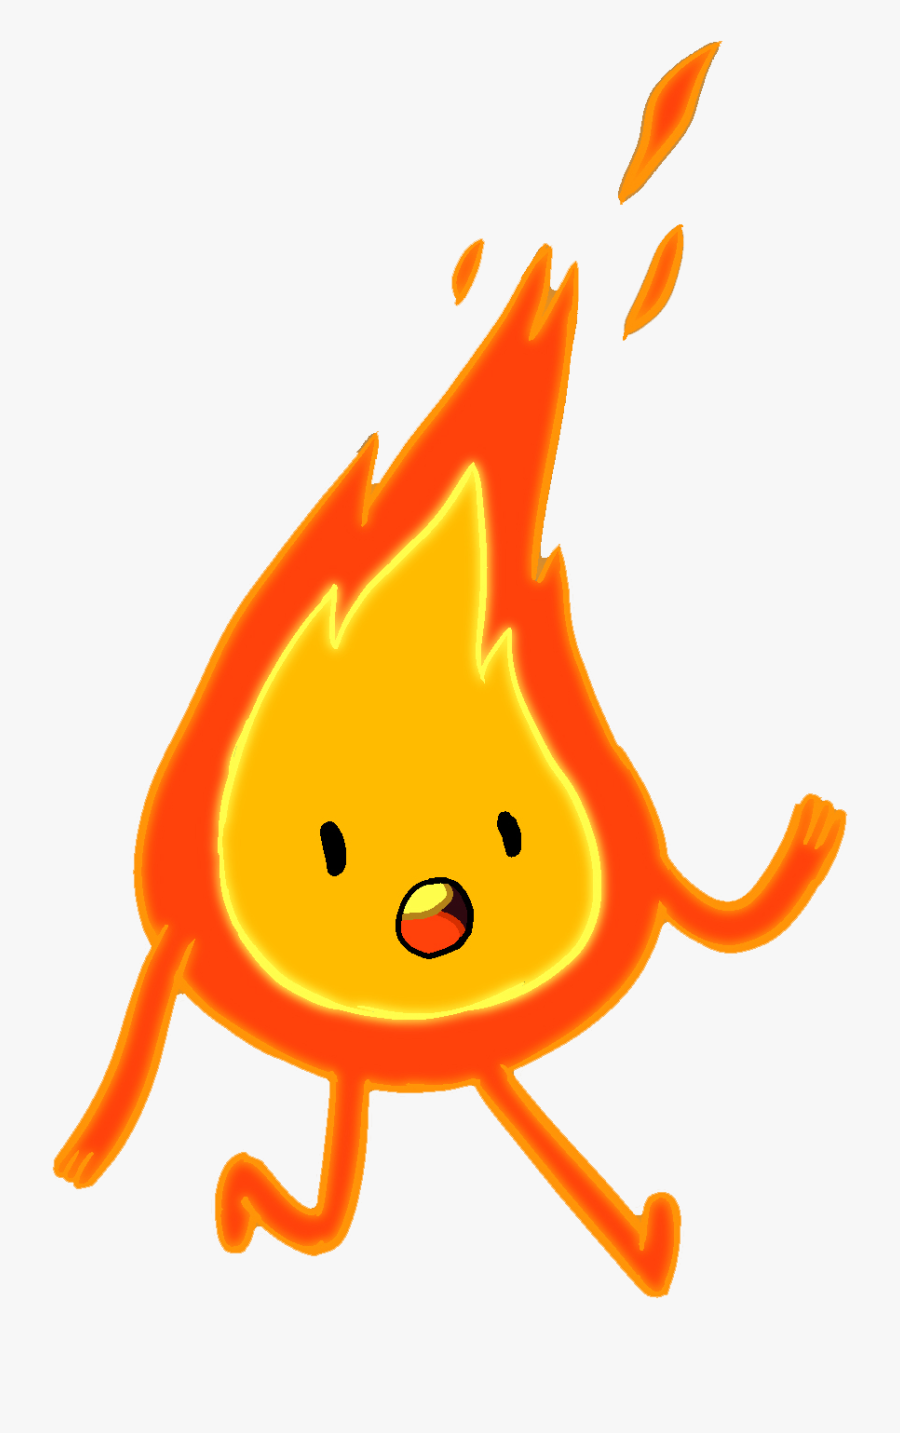 Person On Fire Png - Adventure Time Fire People, Transparent Clipart